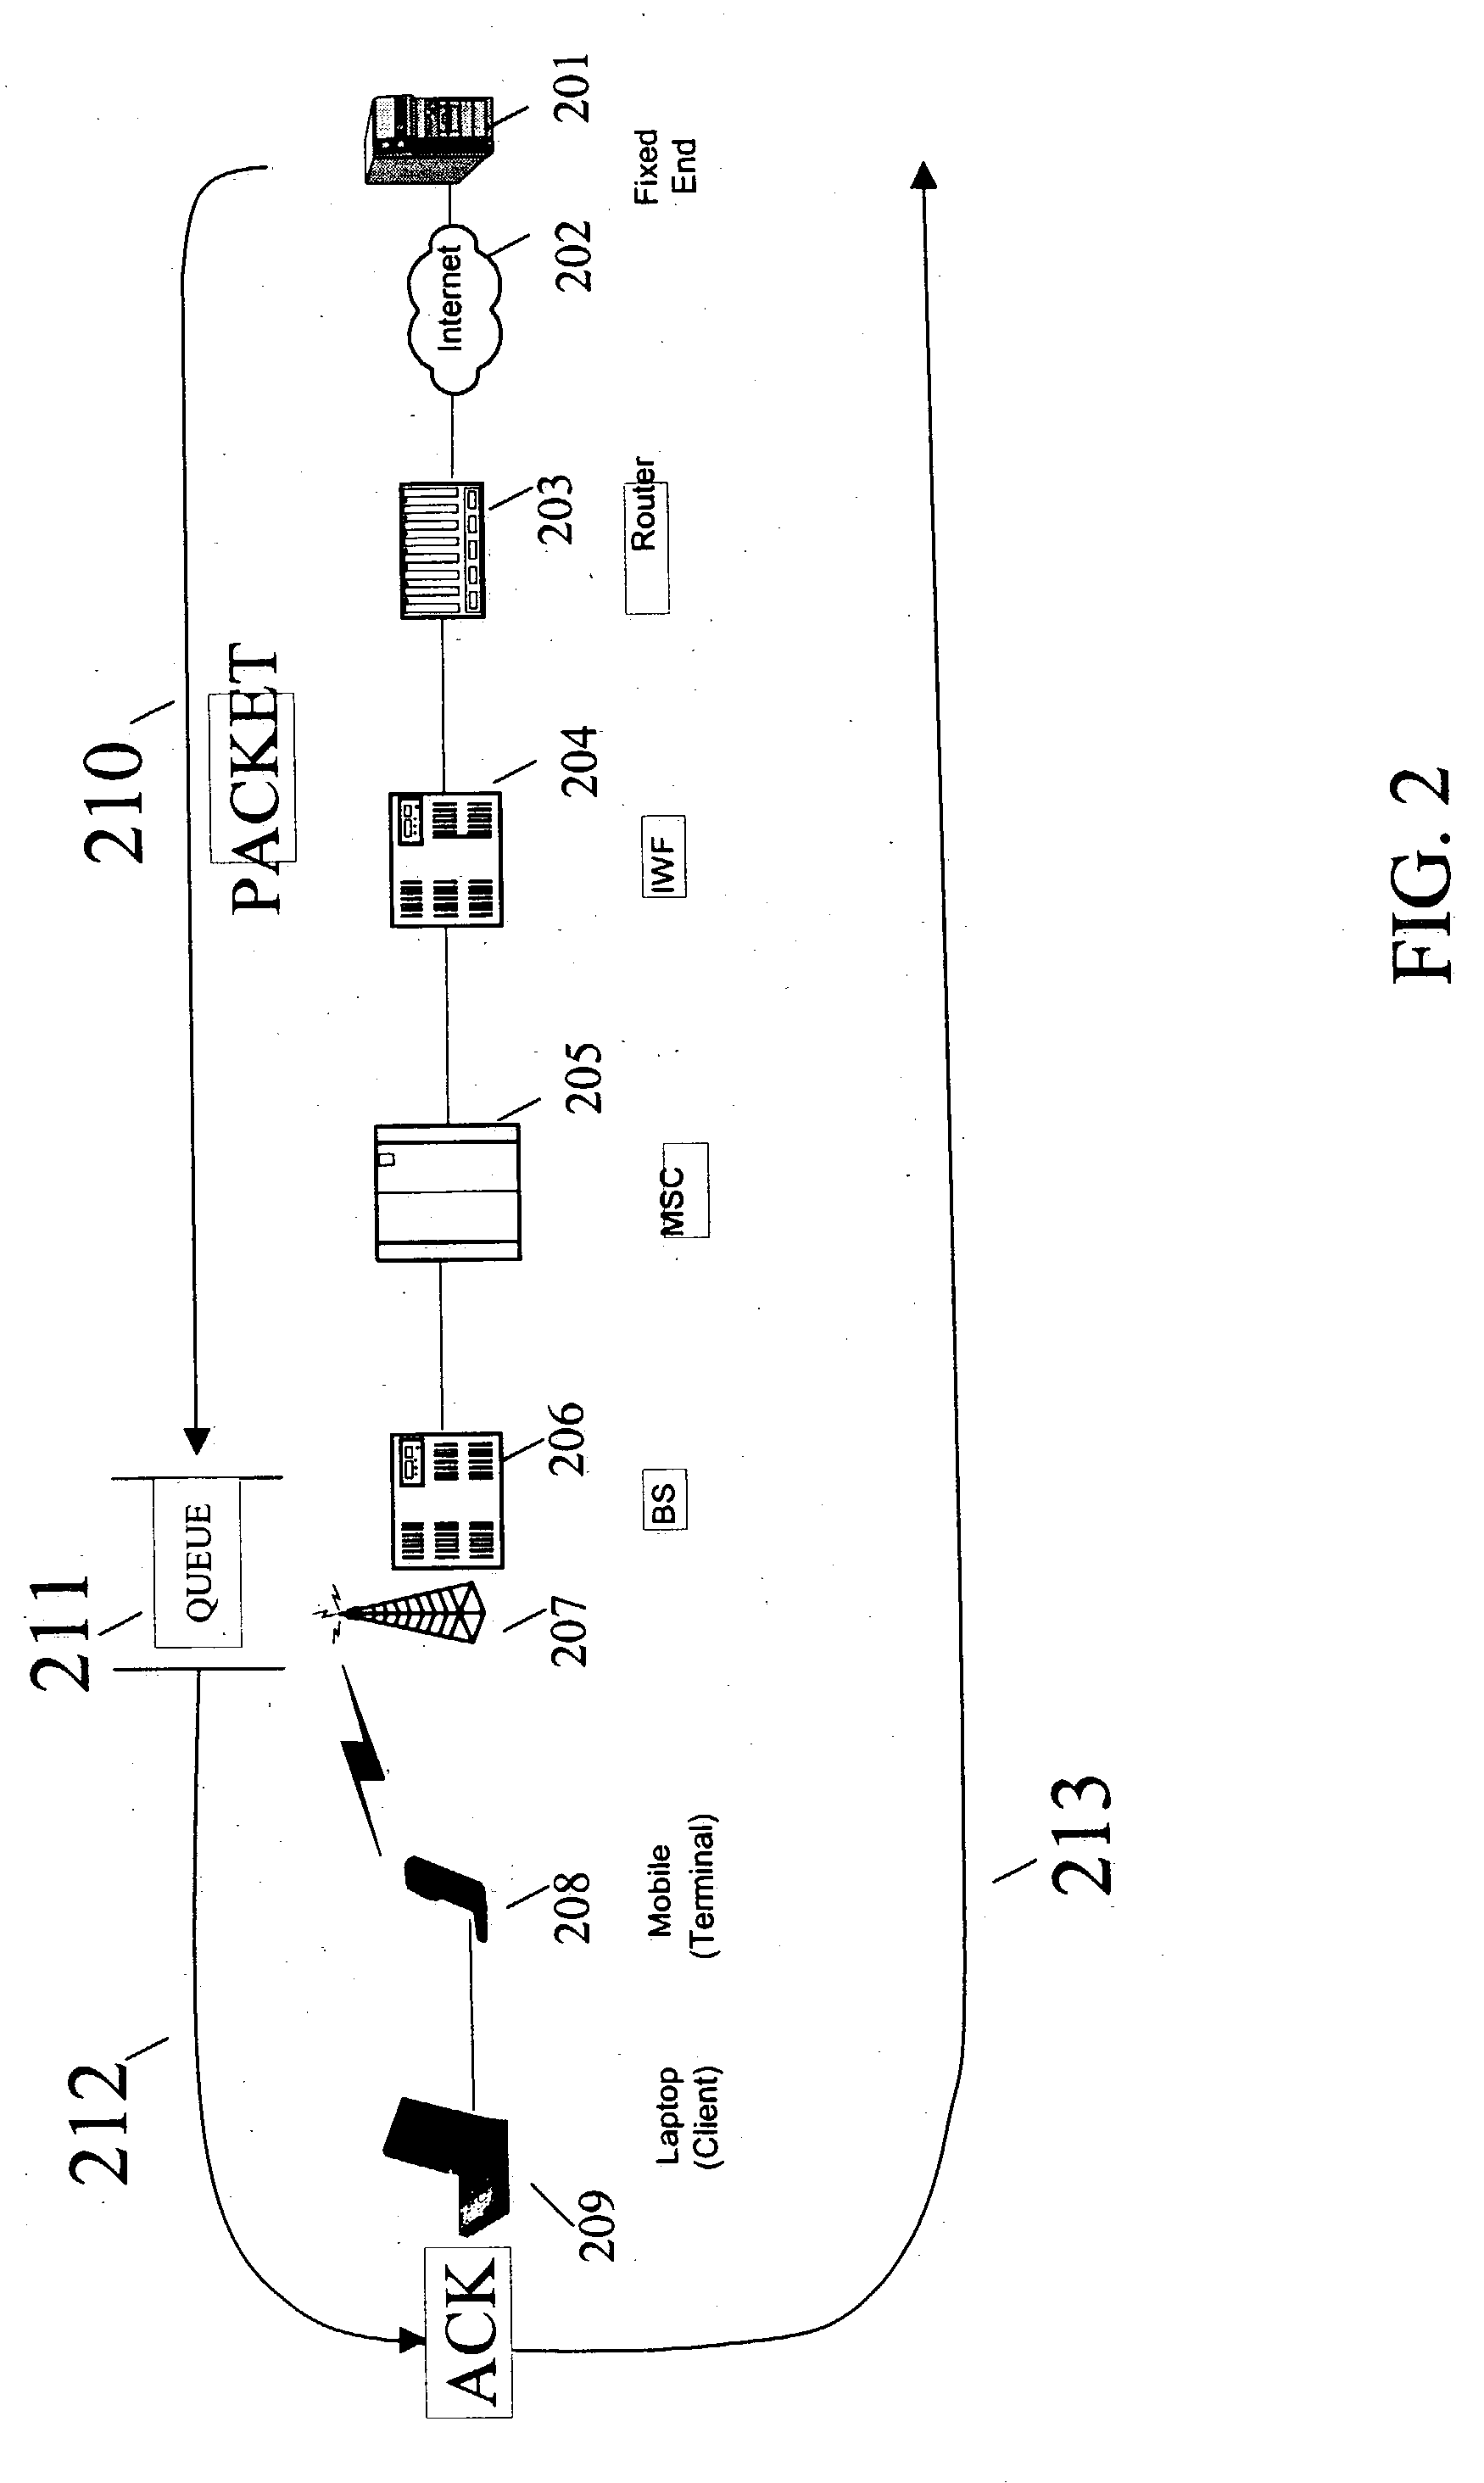 Method and apparatus for scheduling transmissions in wireless data networks